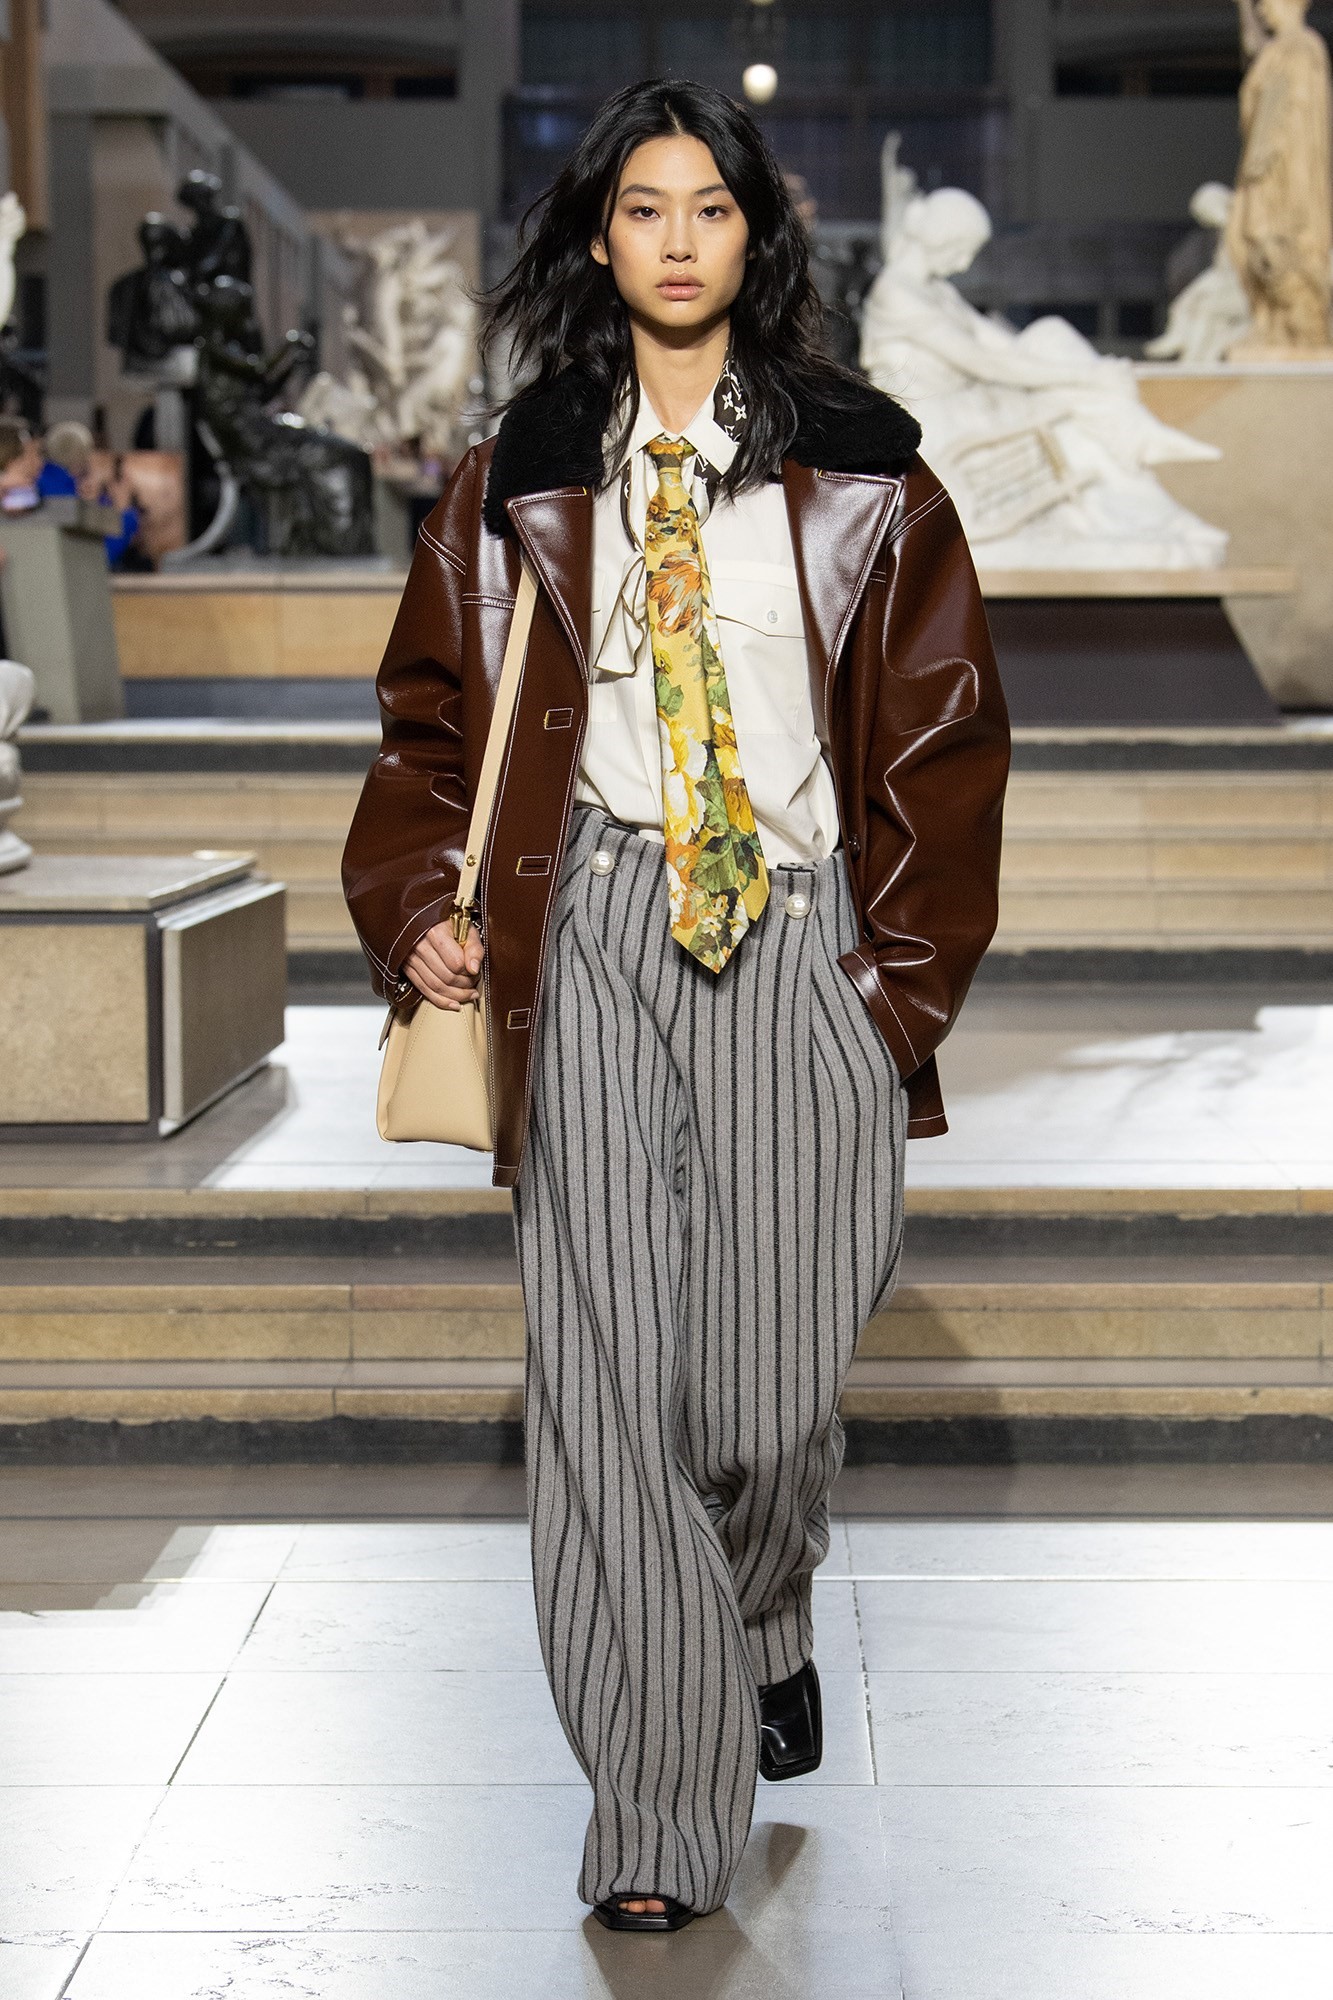 A Teenage Fantasy”: Louis Vuitton A/W22 Captures the Joy of Youth